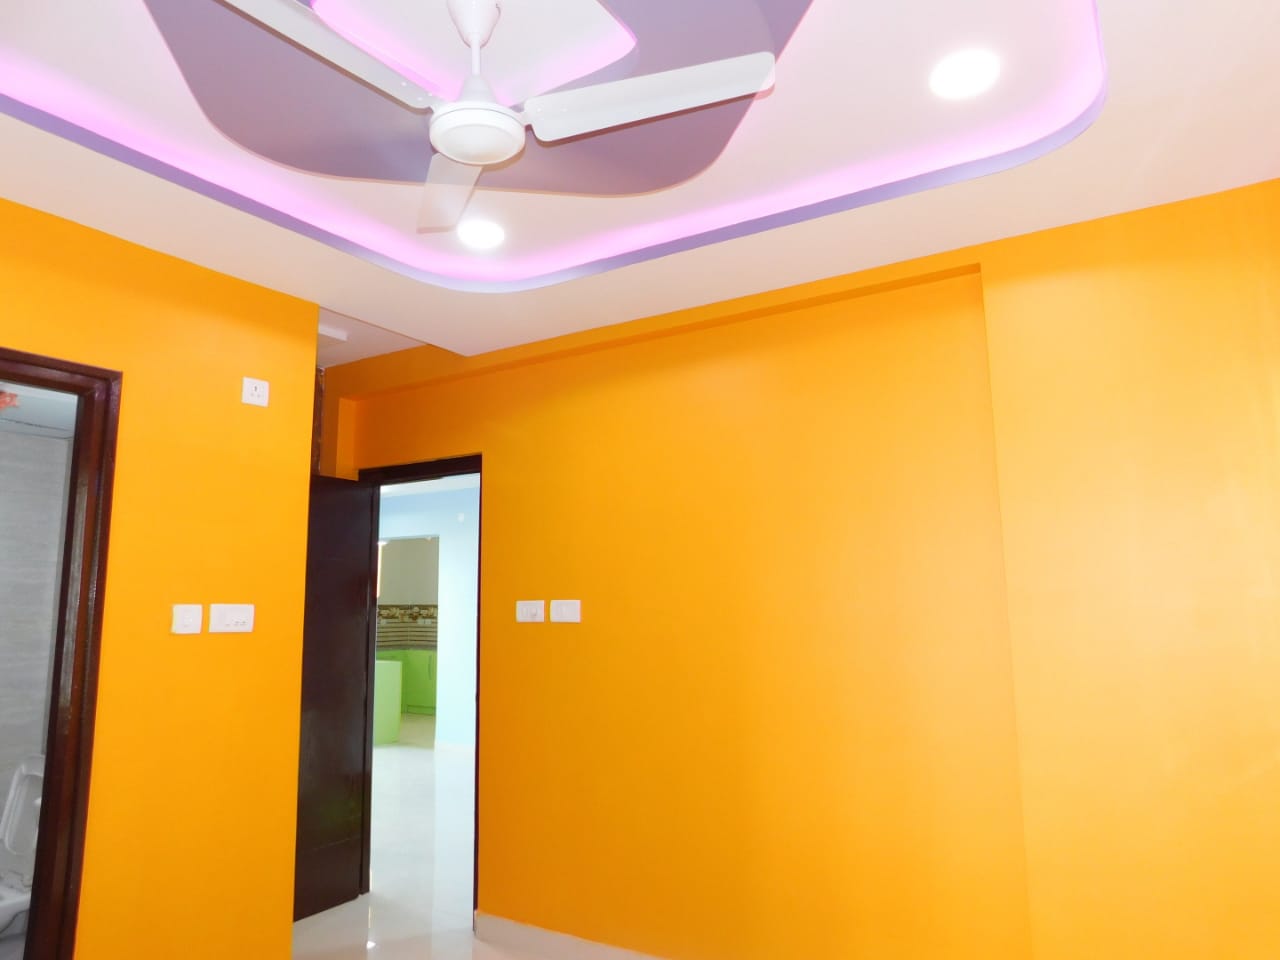 CHEAP AND BEST INTERIORS IN HYDERABAD, | R7 INTERIORS | CHEAP AND BEST INTERIORS IN HYDERABAD, CHEAP AND BEST INTERIORS IN SECUNDERABAD, CHEAP AND BEST INTERIORS IN GACHIBOWLI, CHEAP AND BEST INTERIORS IN  KOKAPET, CHEAP AND BEST INTERIORS IN  KUKATPALLY, - GL40633